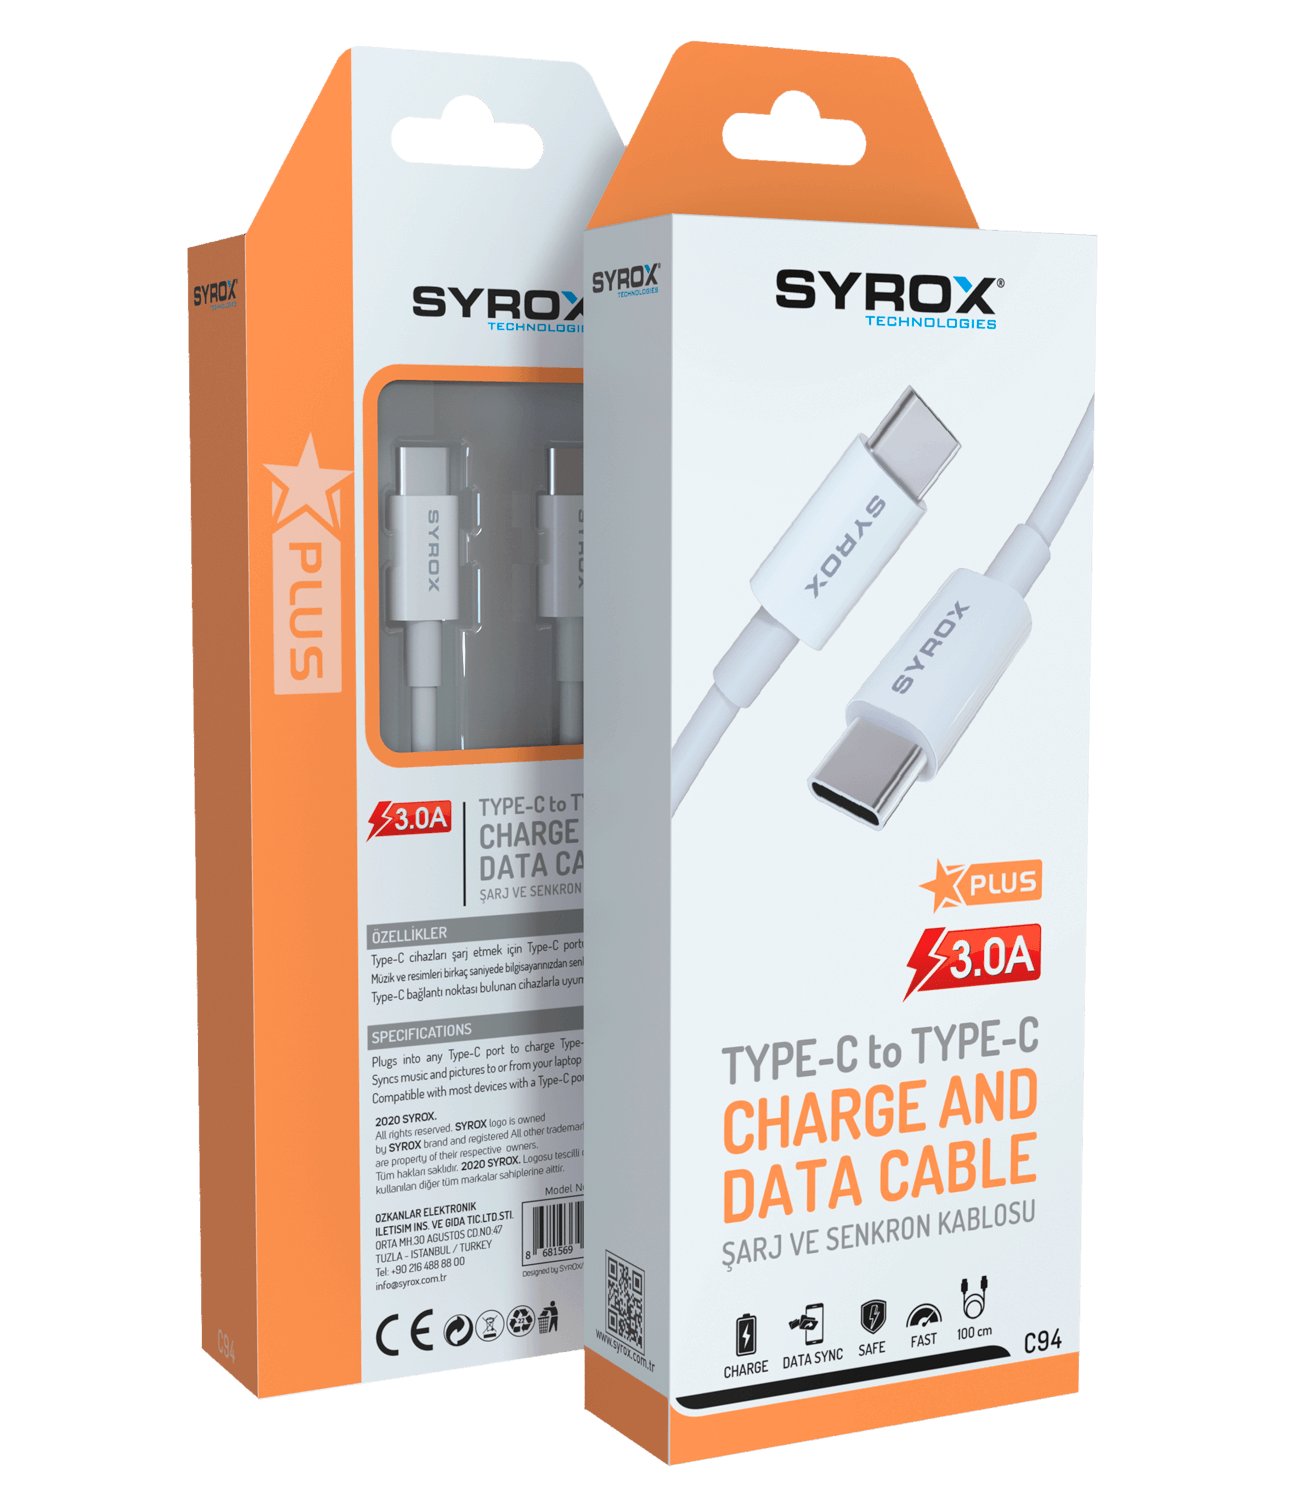 SYROX TYPE-C TO TYPE-C CHARGER AND DATA CABLE C94